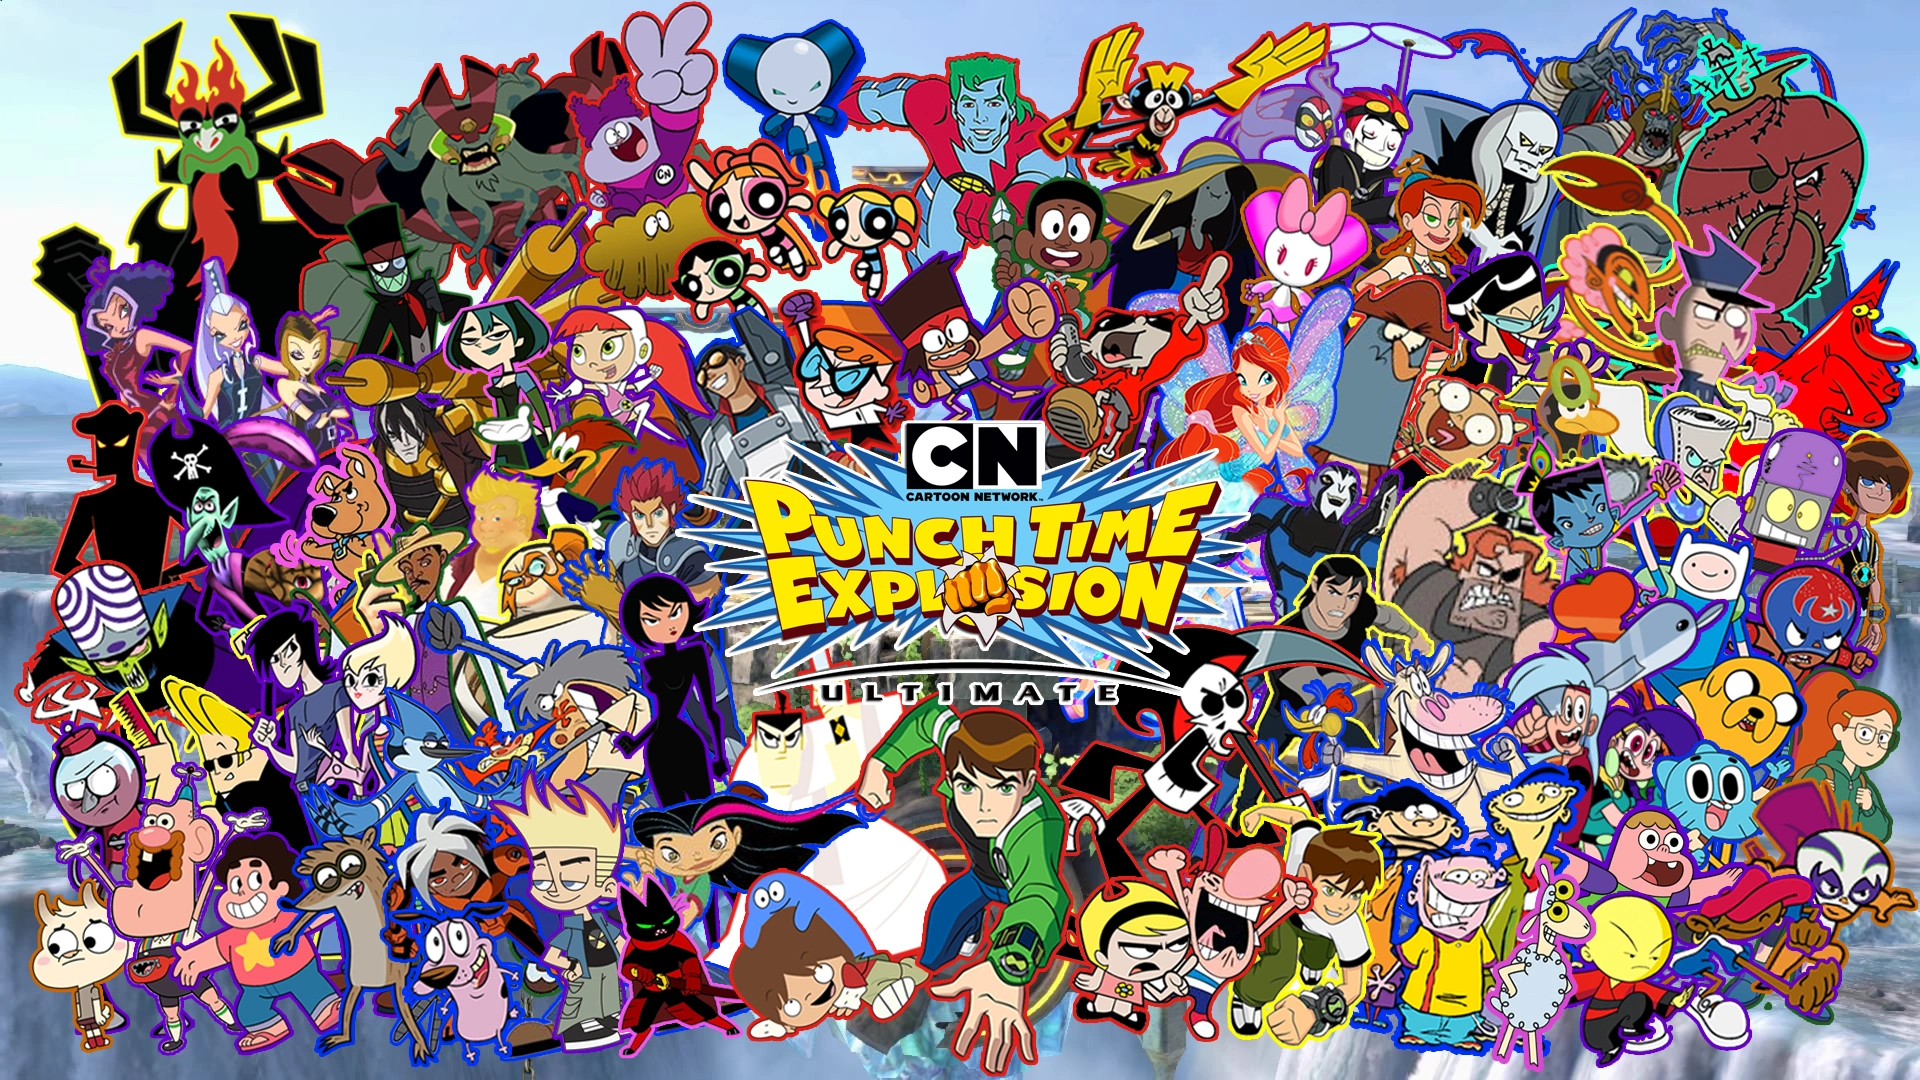 Cartoon Network: Punch Time Explosion XL - Press Kit